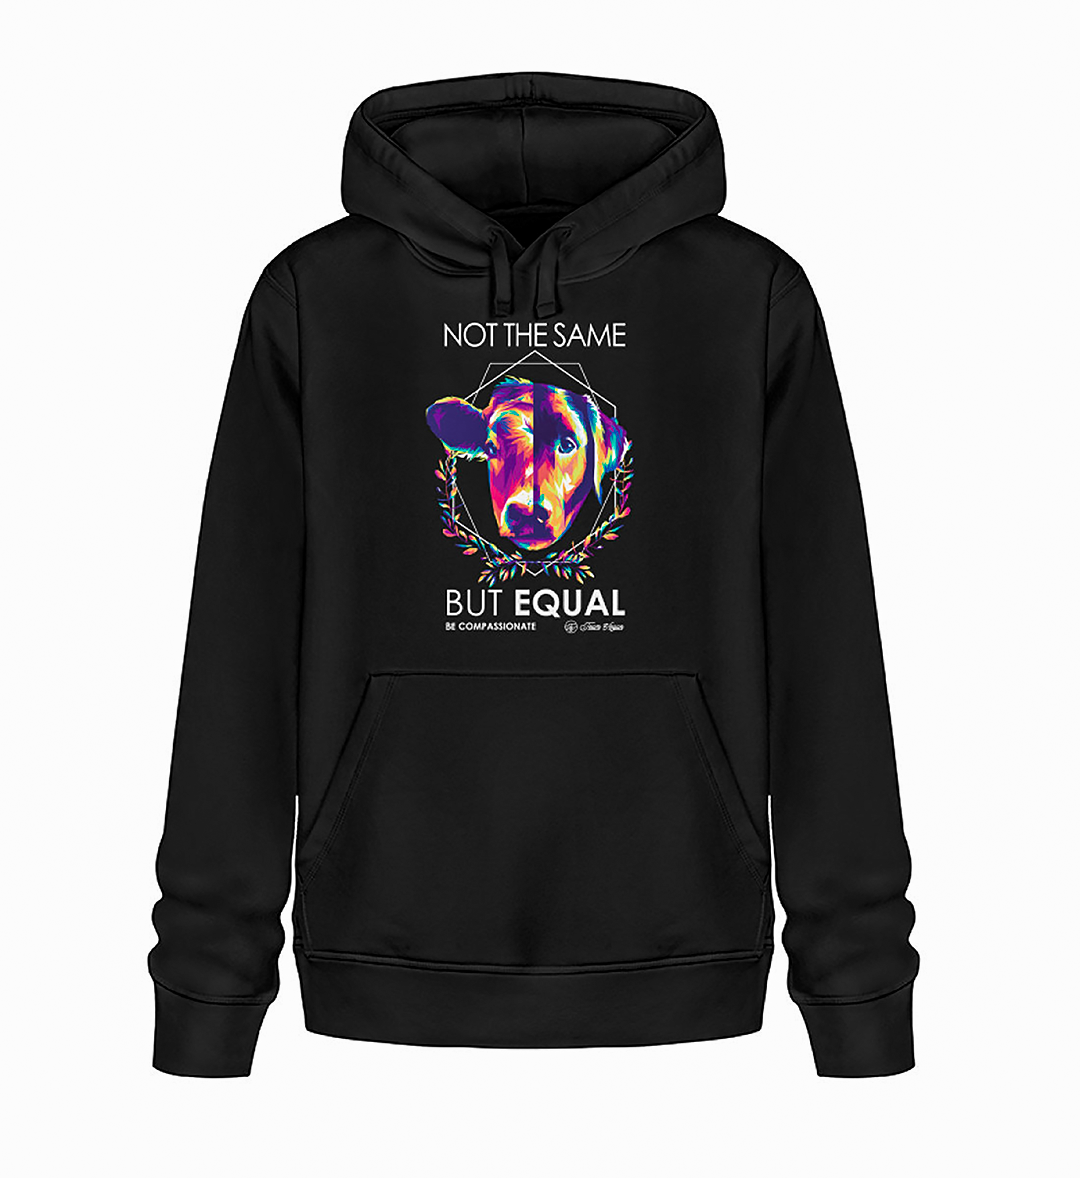 Not the same but equal - Unisex Organic Hoodie - L